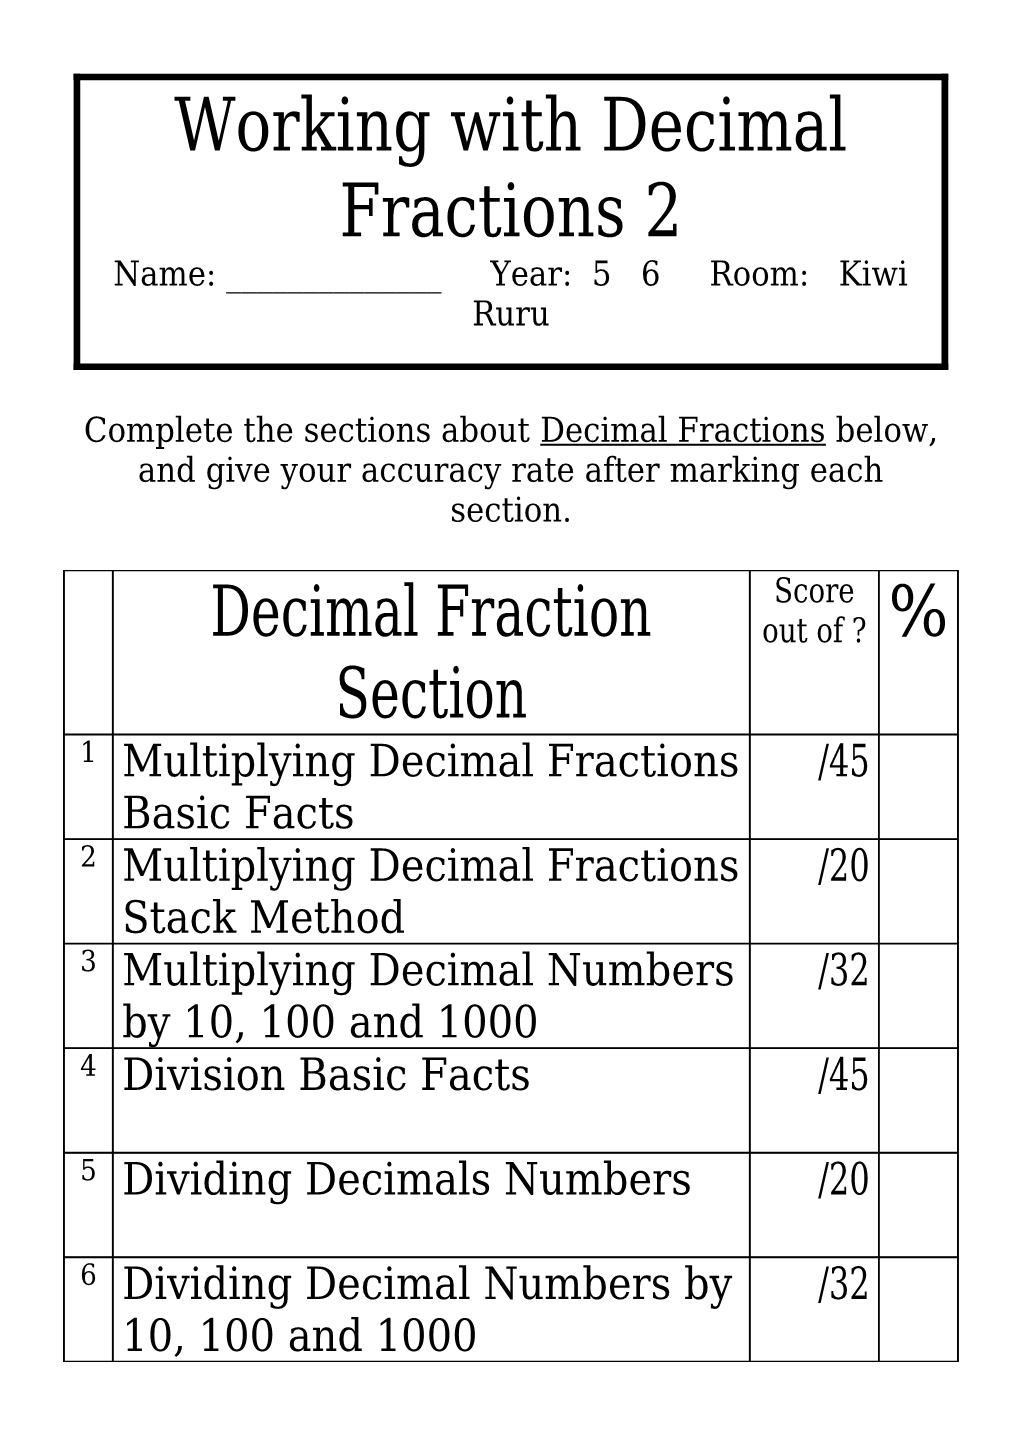 Working with Decimal Fractions 2